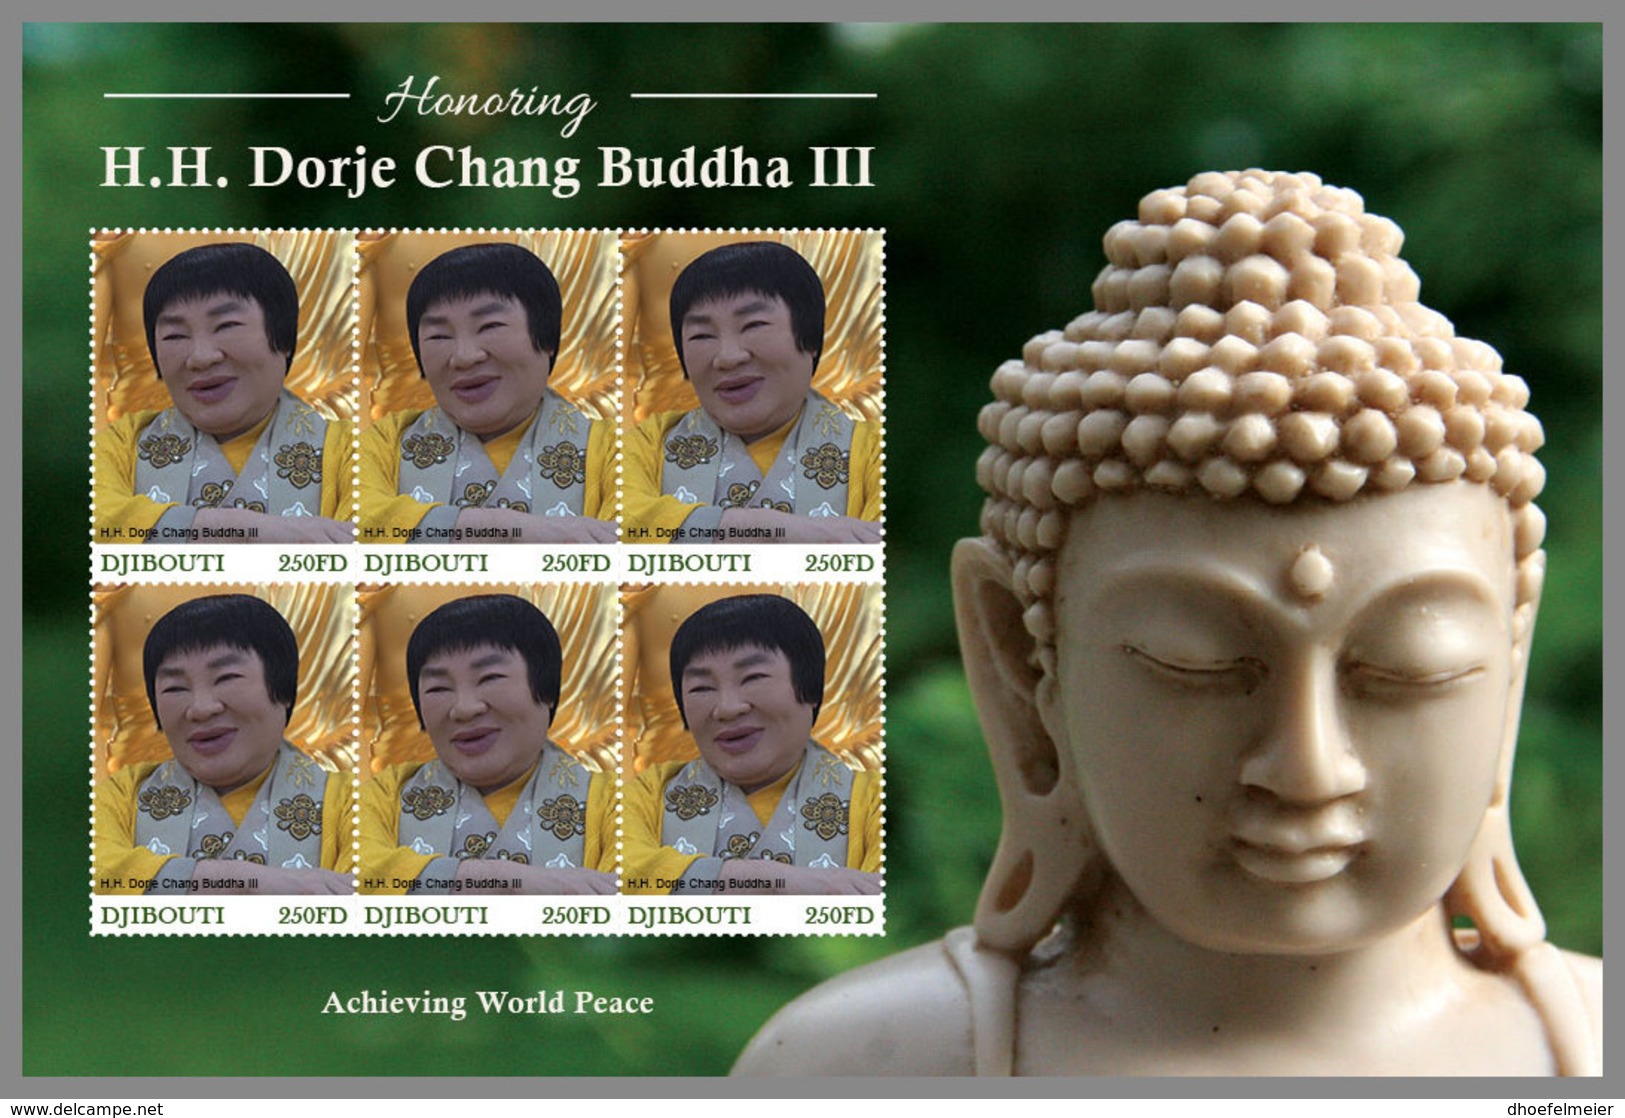 DJIBOUTI 2020 MNH Honoring H.H. Dorje Chang Buddha III M/S - OFFICIAL ISSUE - DHQ2033 - Buddhism